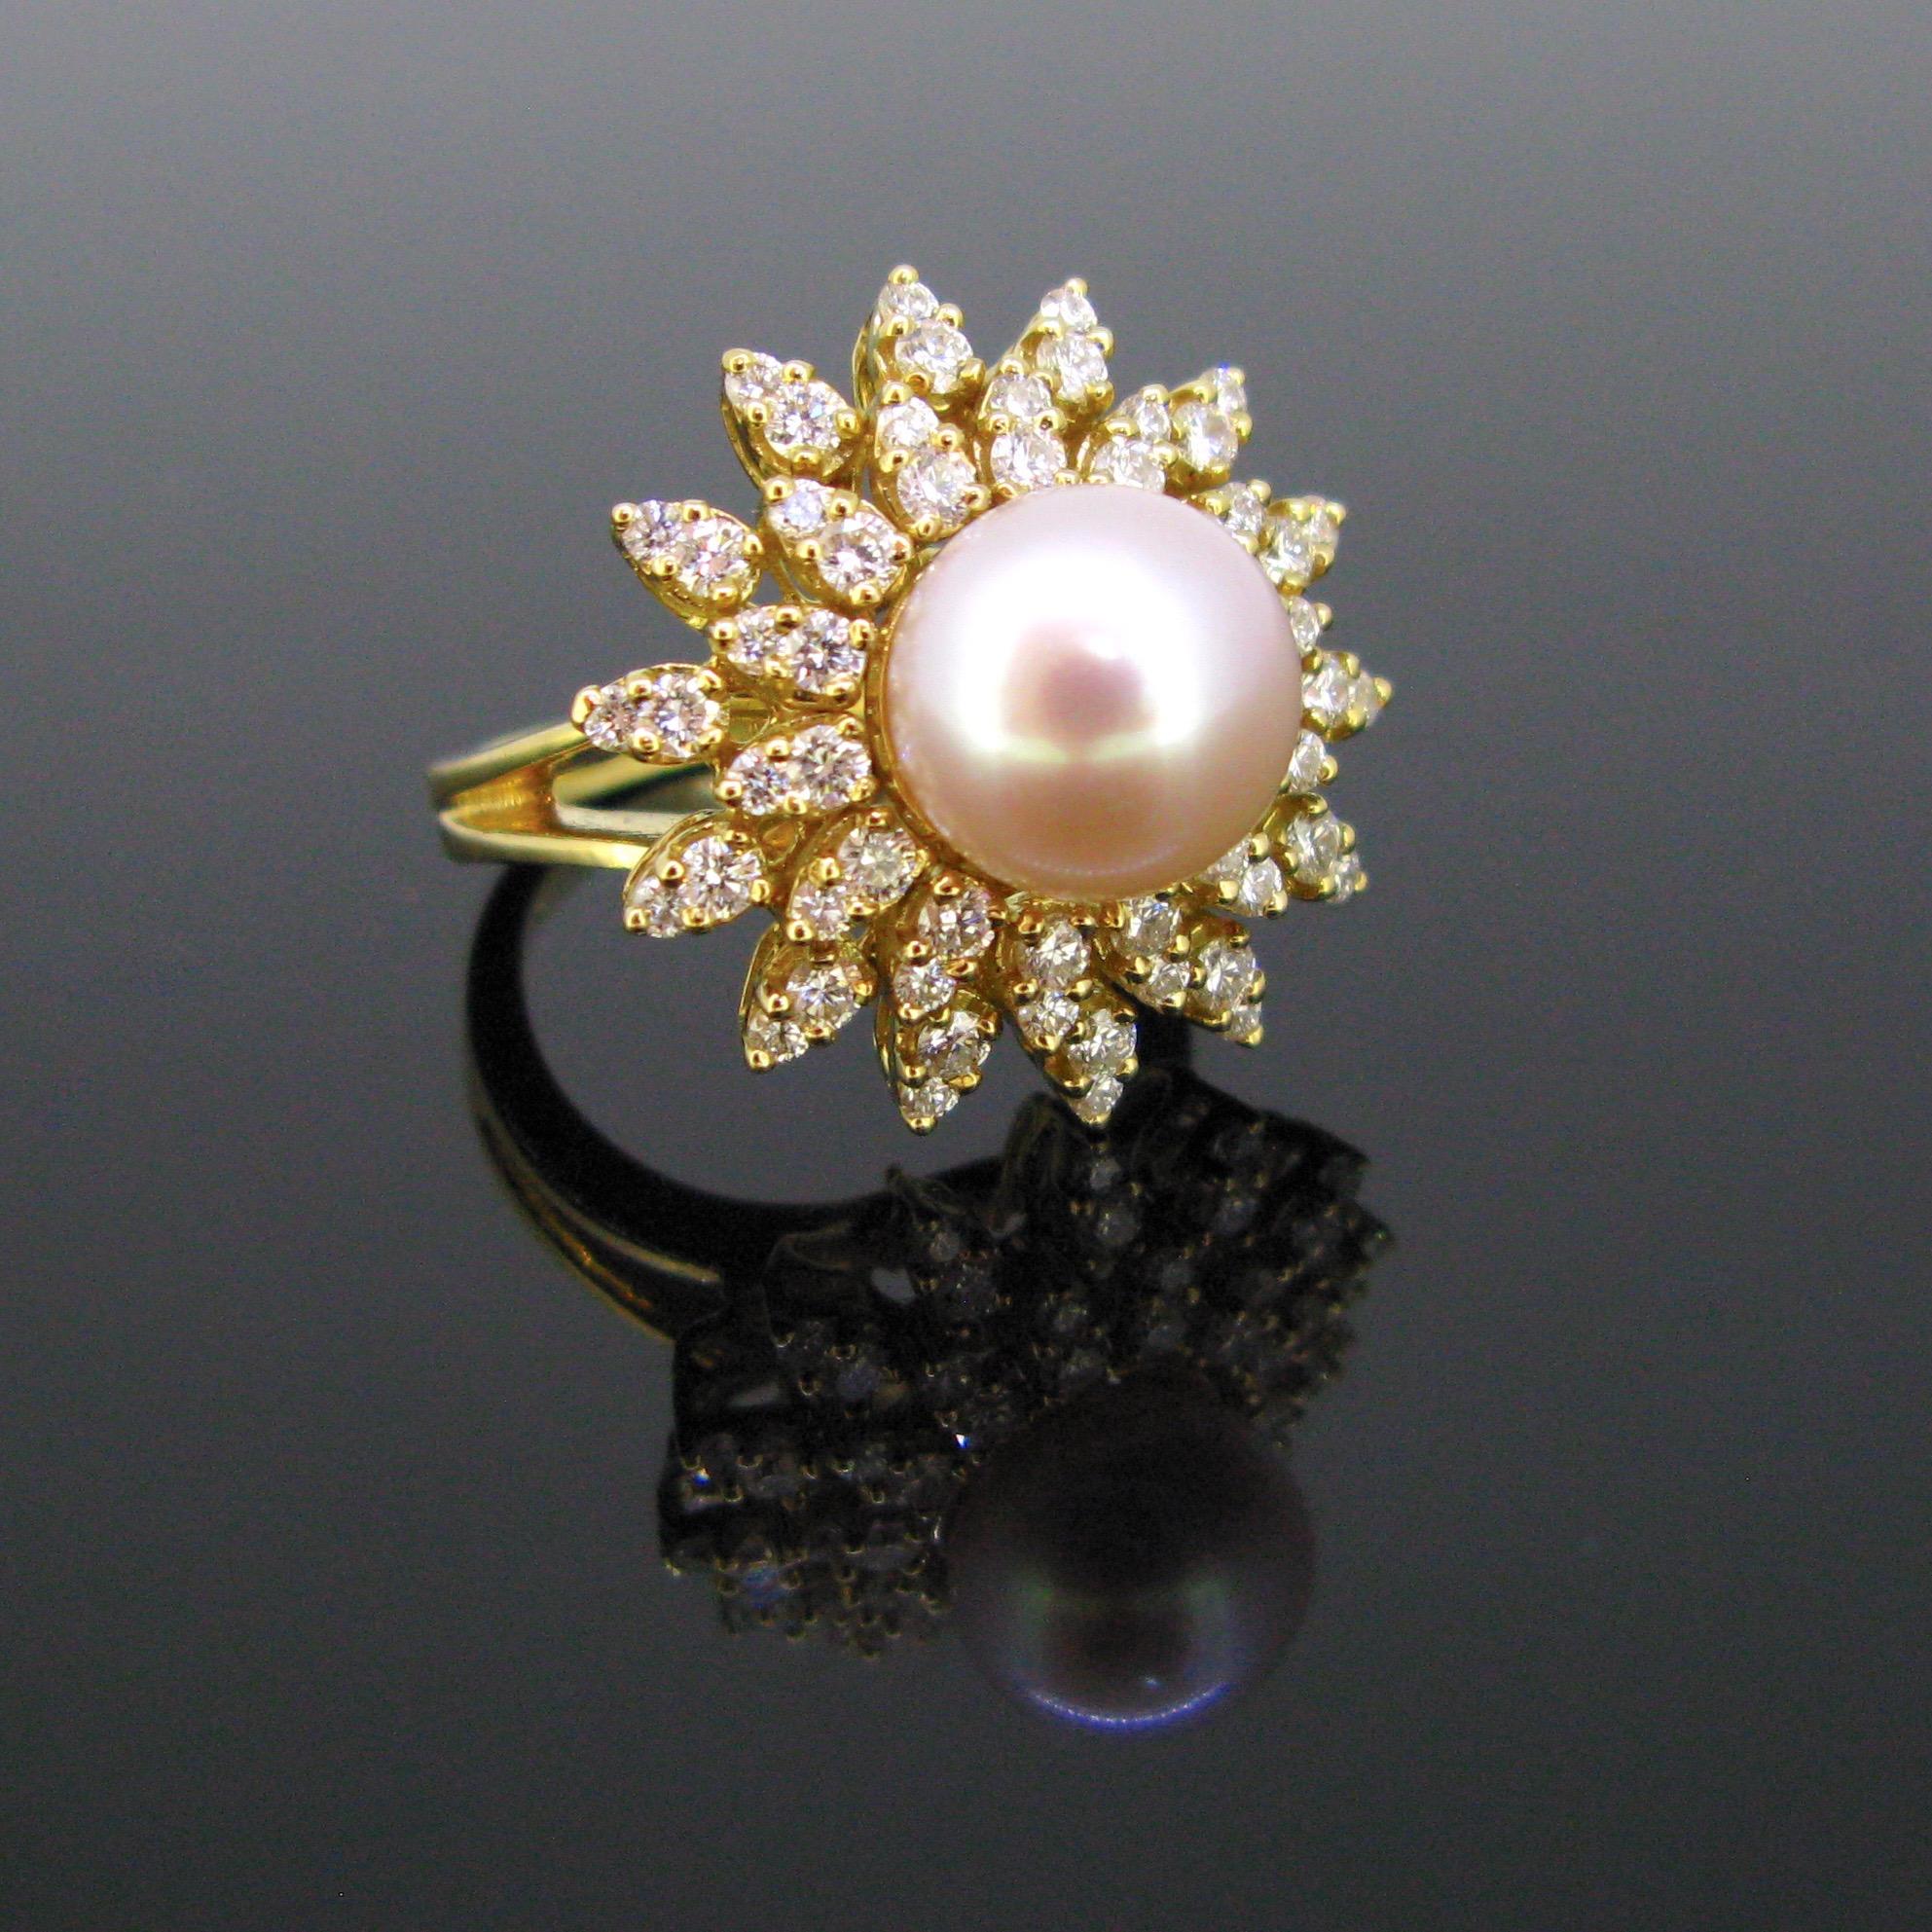 This ring is fully made in 18kt yellow gold. It is set in its centre with a white pinkish cultured South Sea pearl of 10mm surrounded by two rows of 56 brilliant cut diamonds with an approximate total carat weight of 1ct. It is in very good